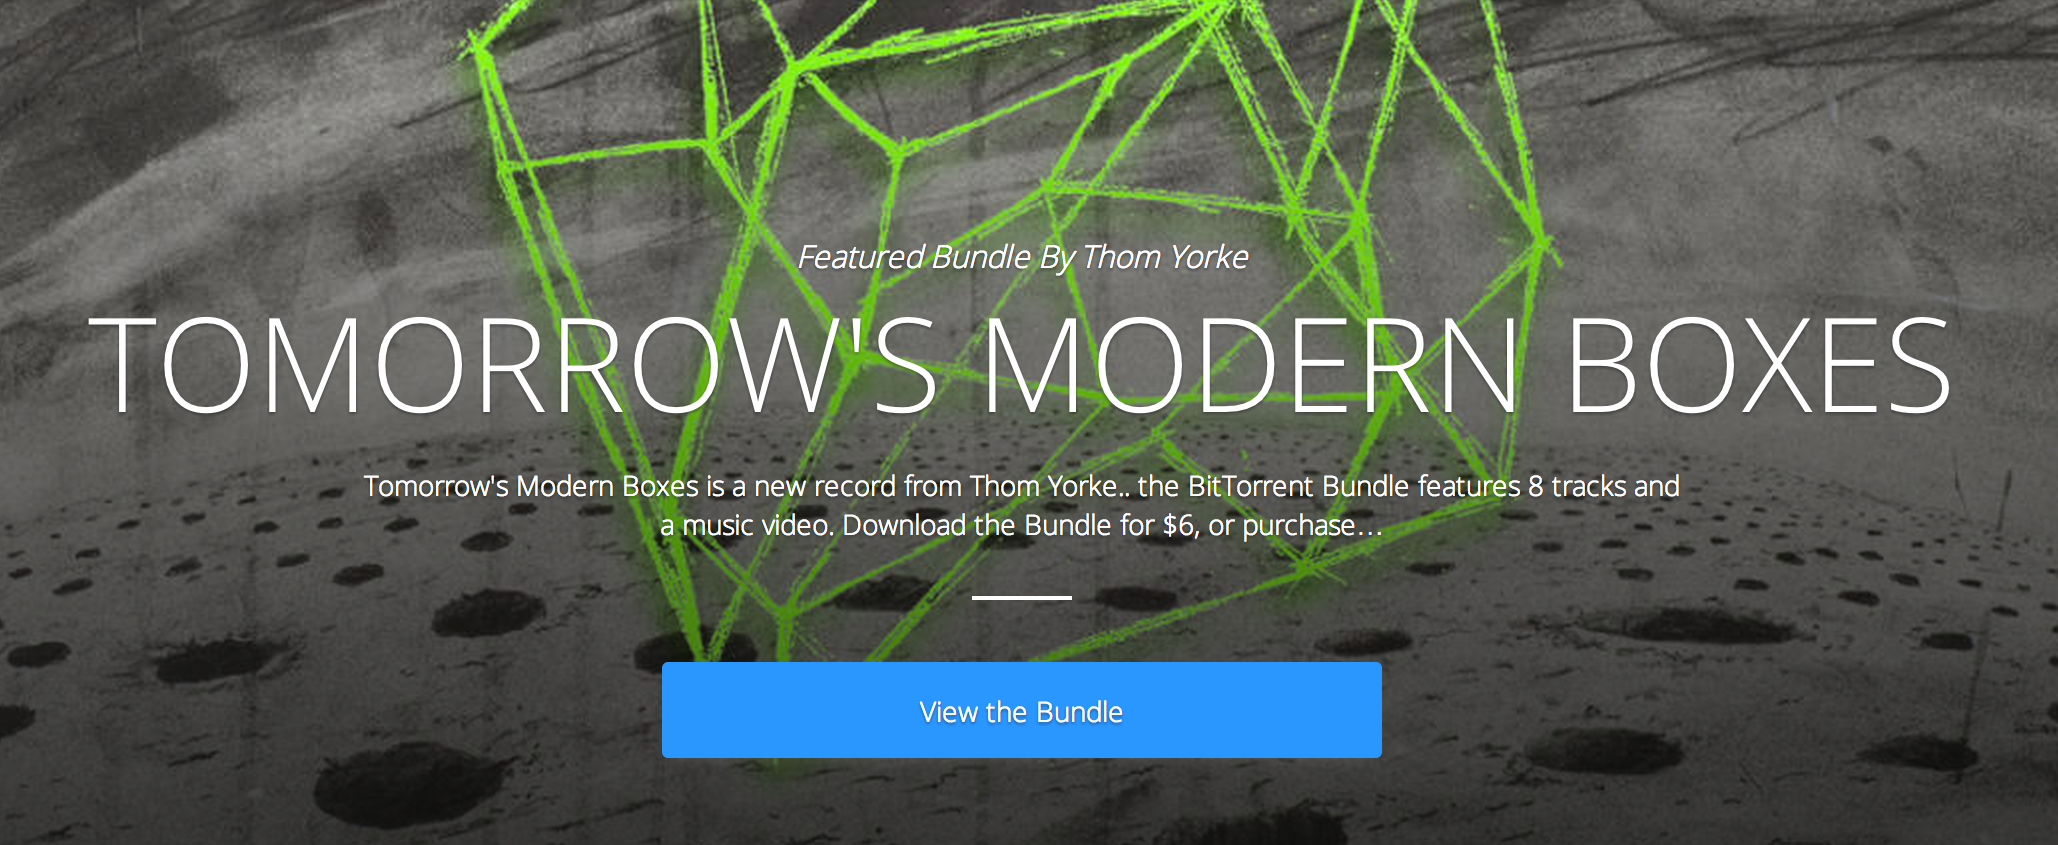 Thom Yorke Paves the Way for Filmmakers to Use Paygated Content via BitTorrent Bundles